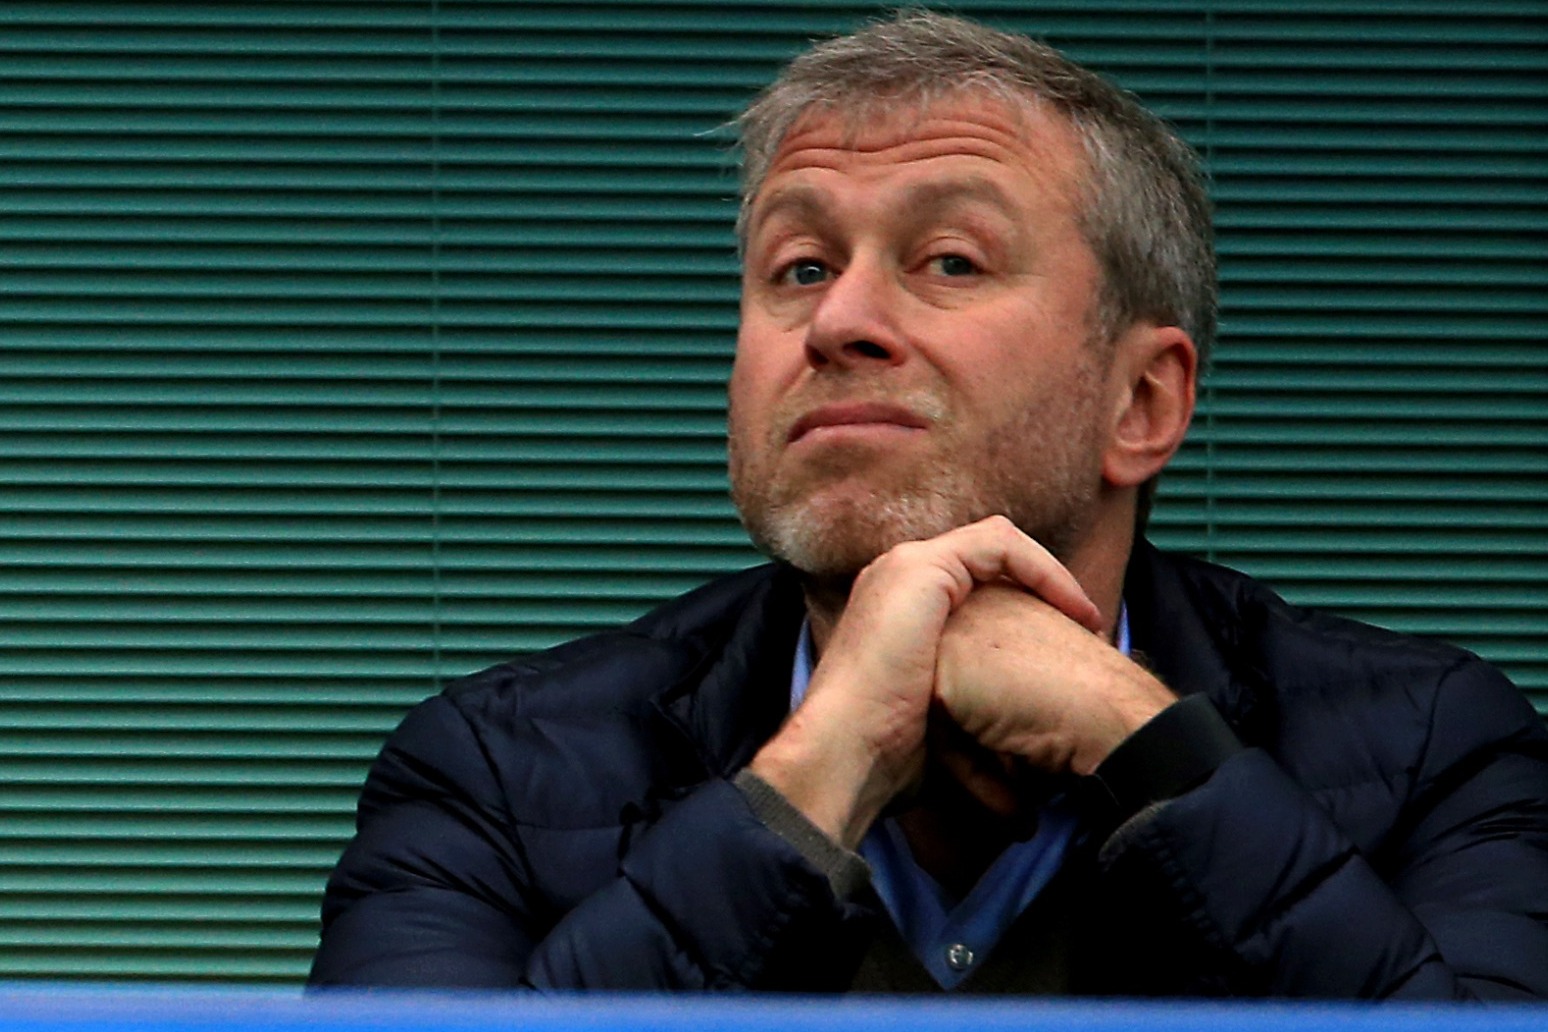 Roman Abramovich suffered symptoms of suspected poisoning after peace talks